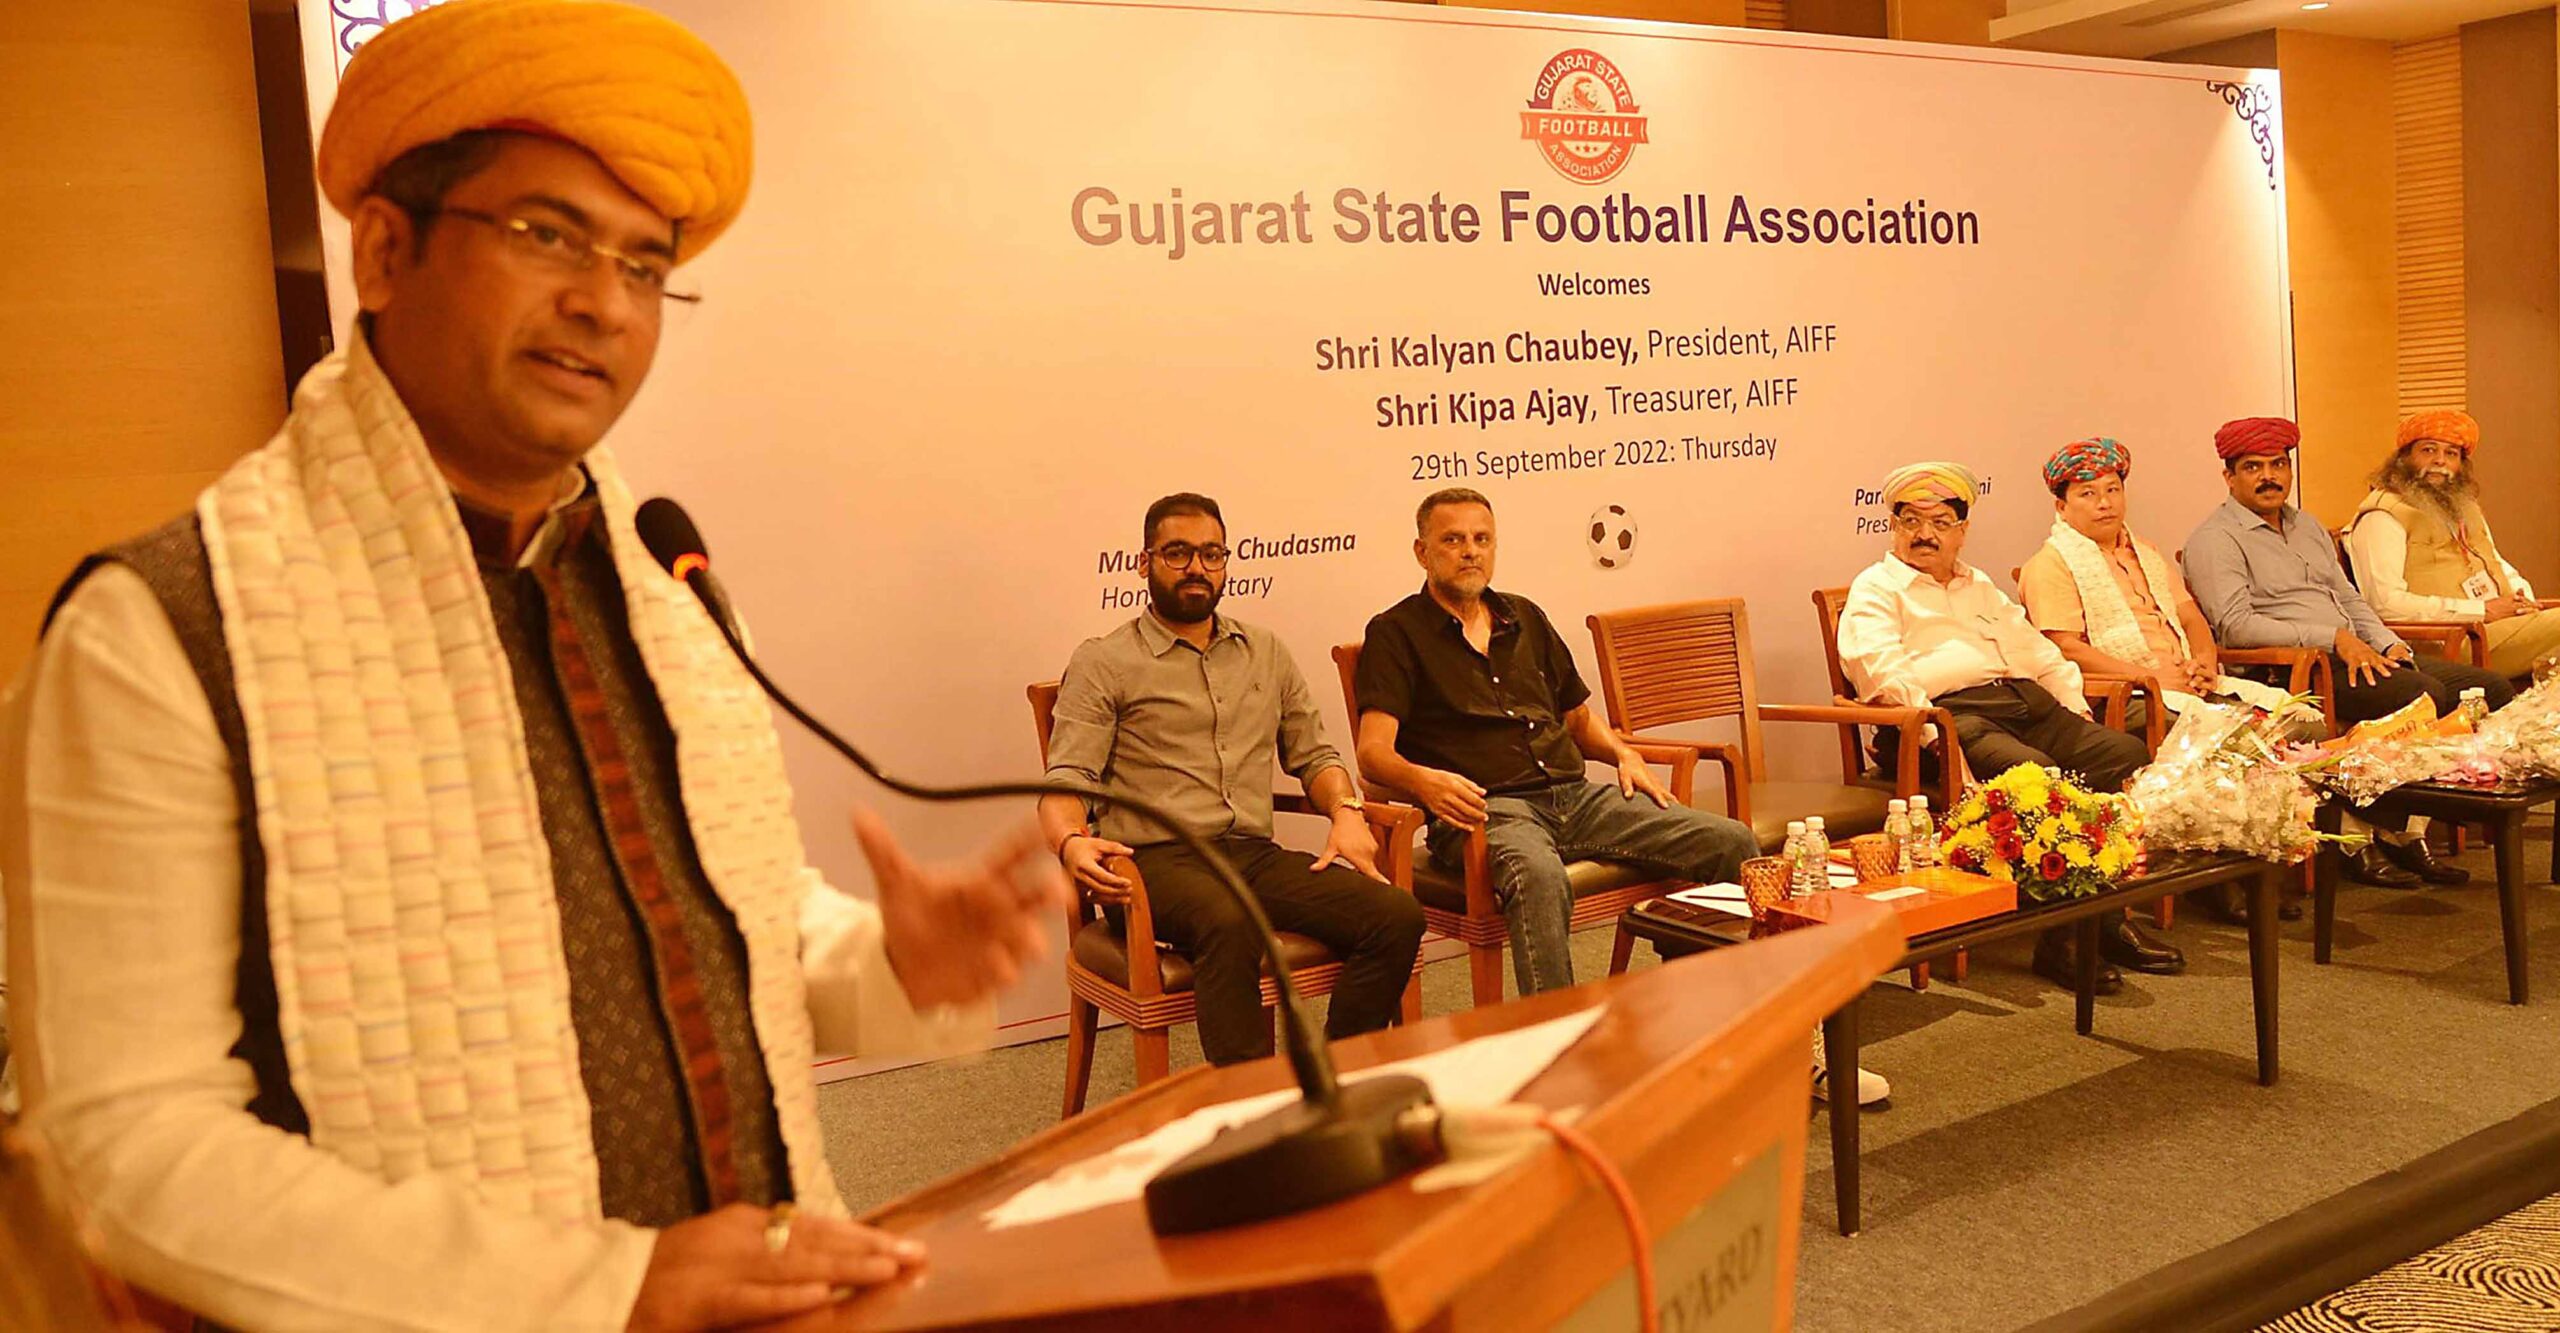 AIFF will reach out to 18 lakh students to prepare talent for the future of football